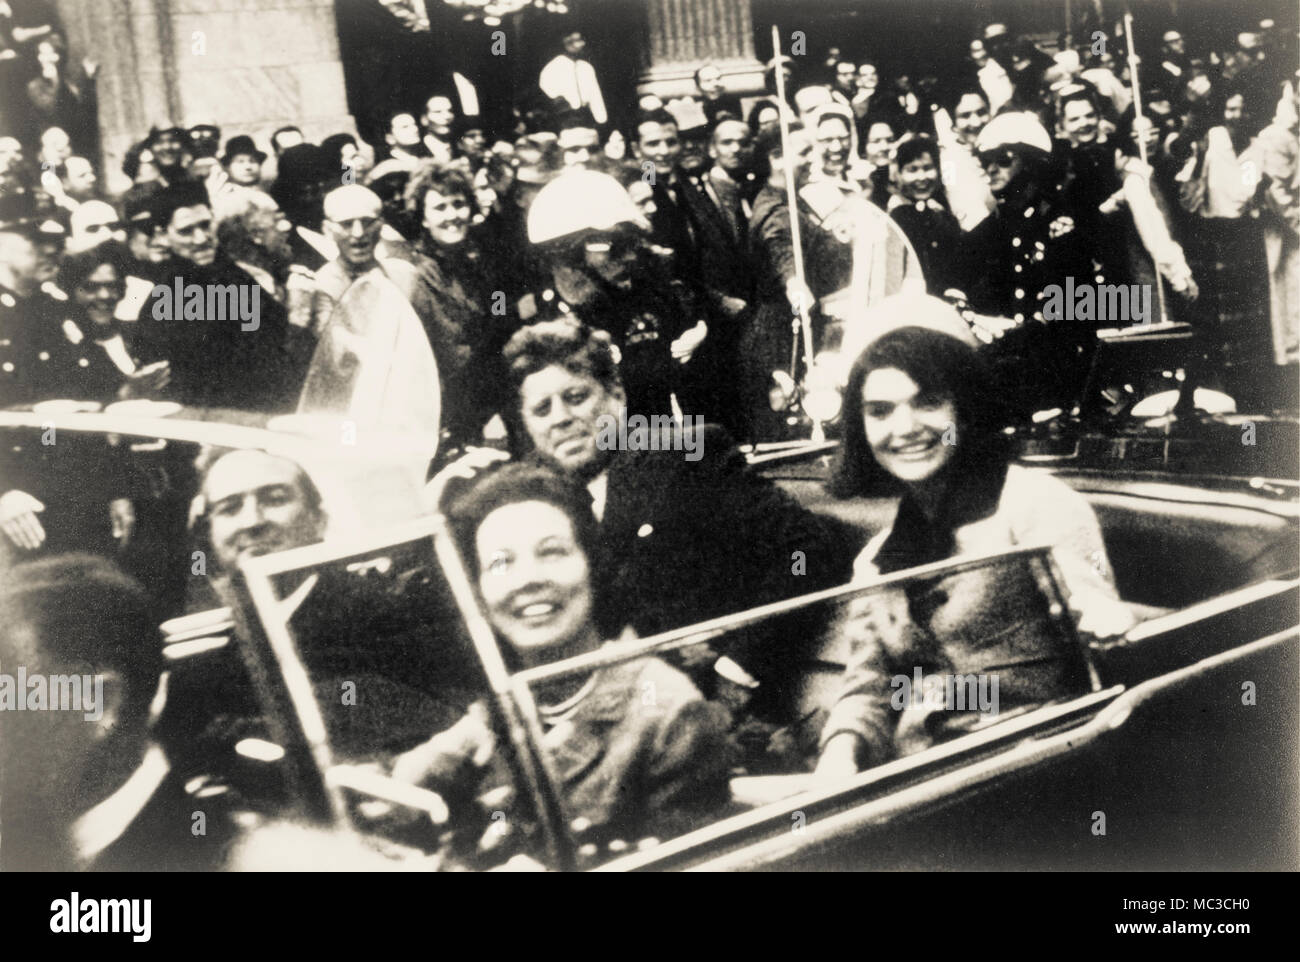 John F. Kennedy, Jacquelyn Kennedy, Texas Governor John Connally and Mrs. Connally in open top presidential limousine moments before the president's assasination in Dallas, Texas in November 1963. Stock Photo